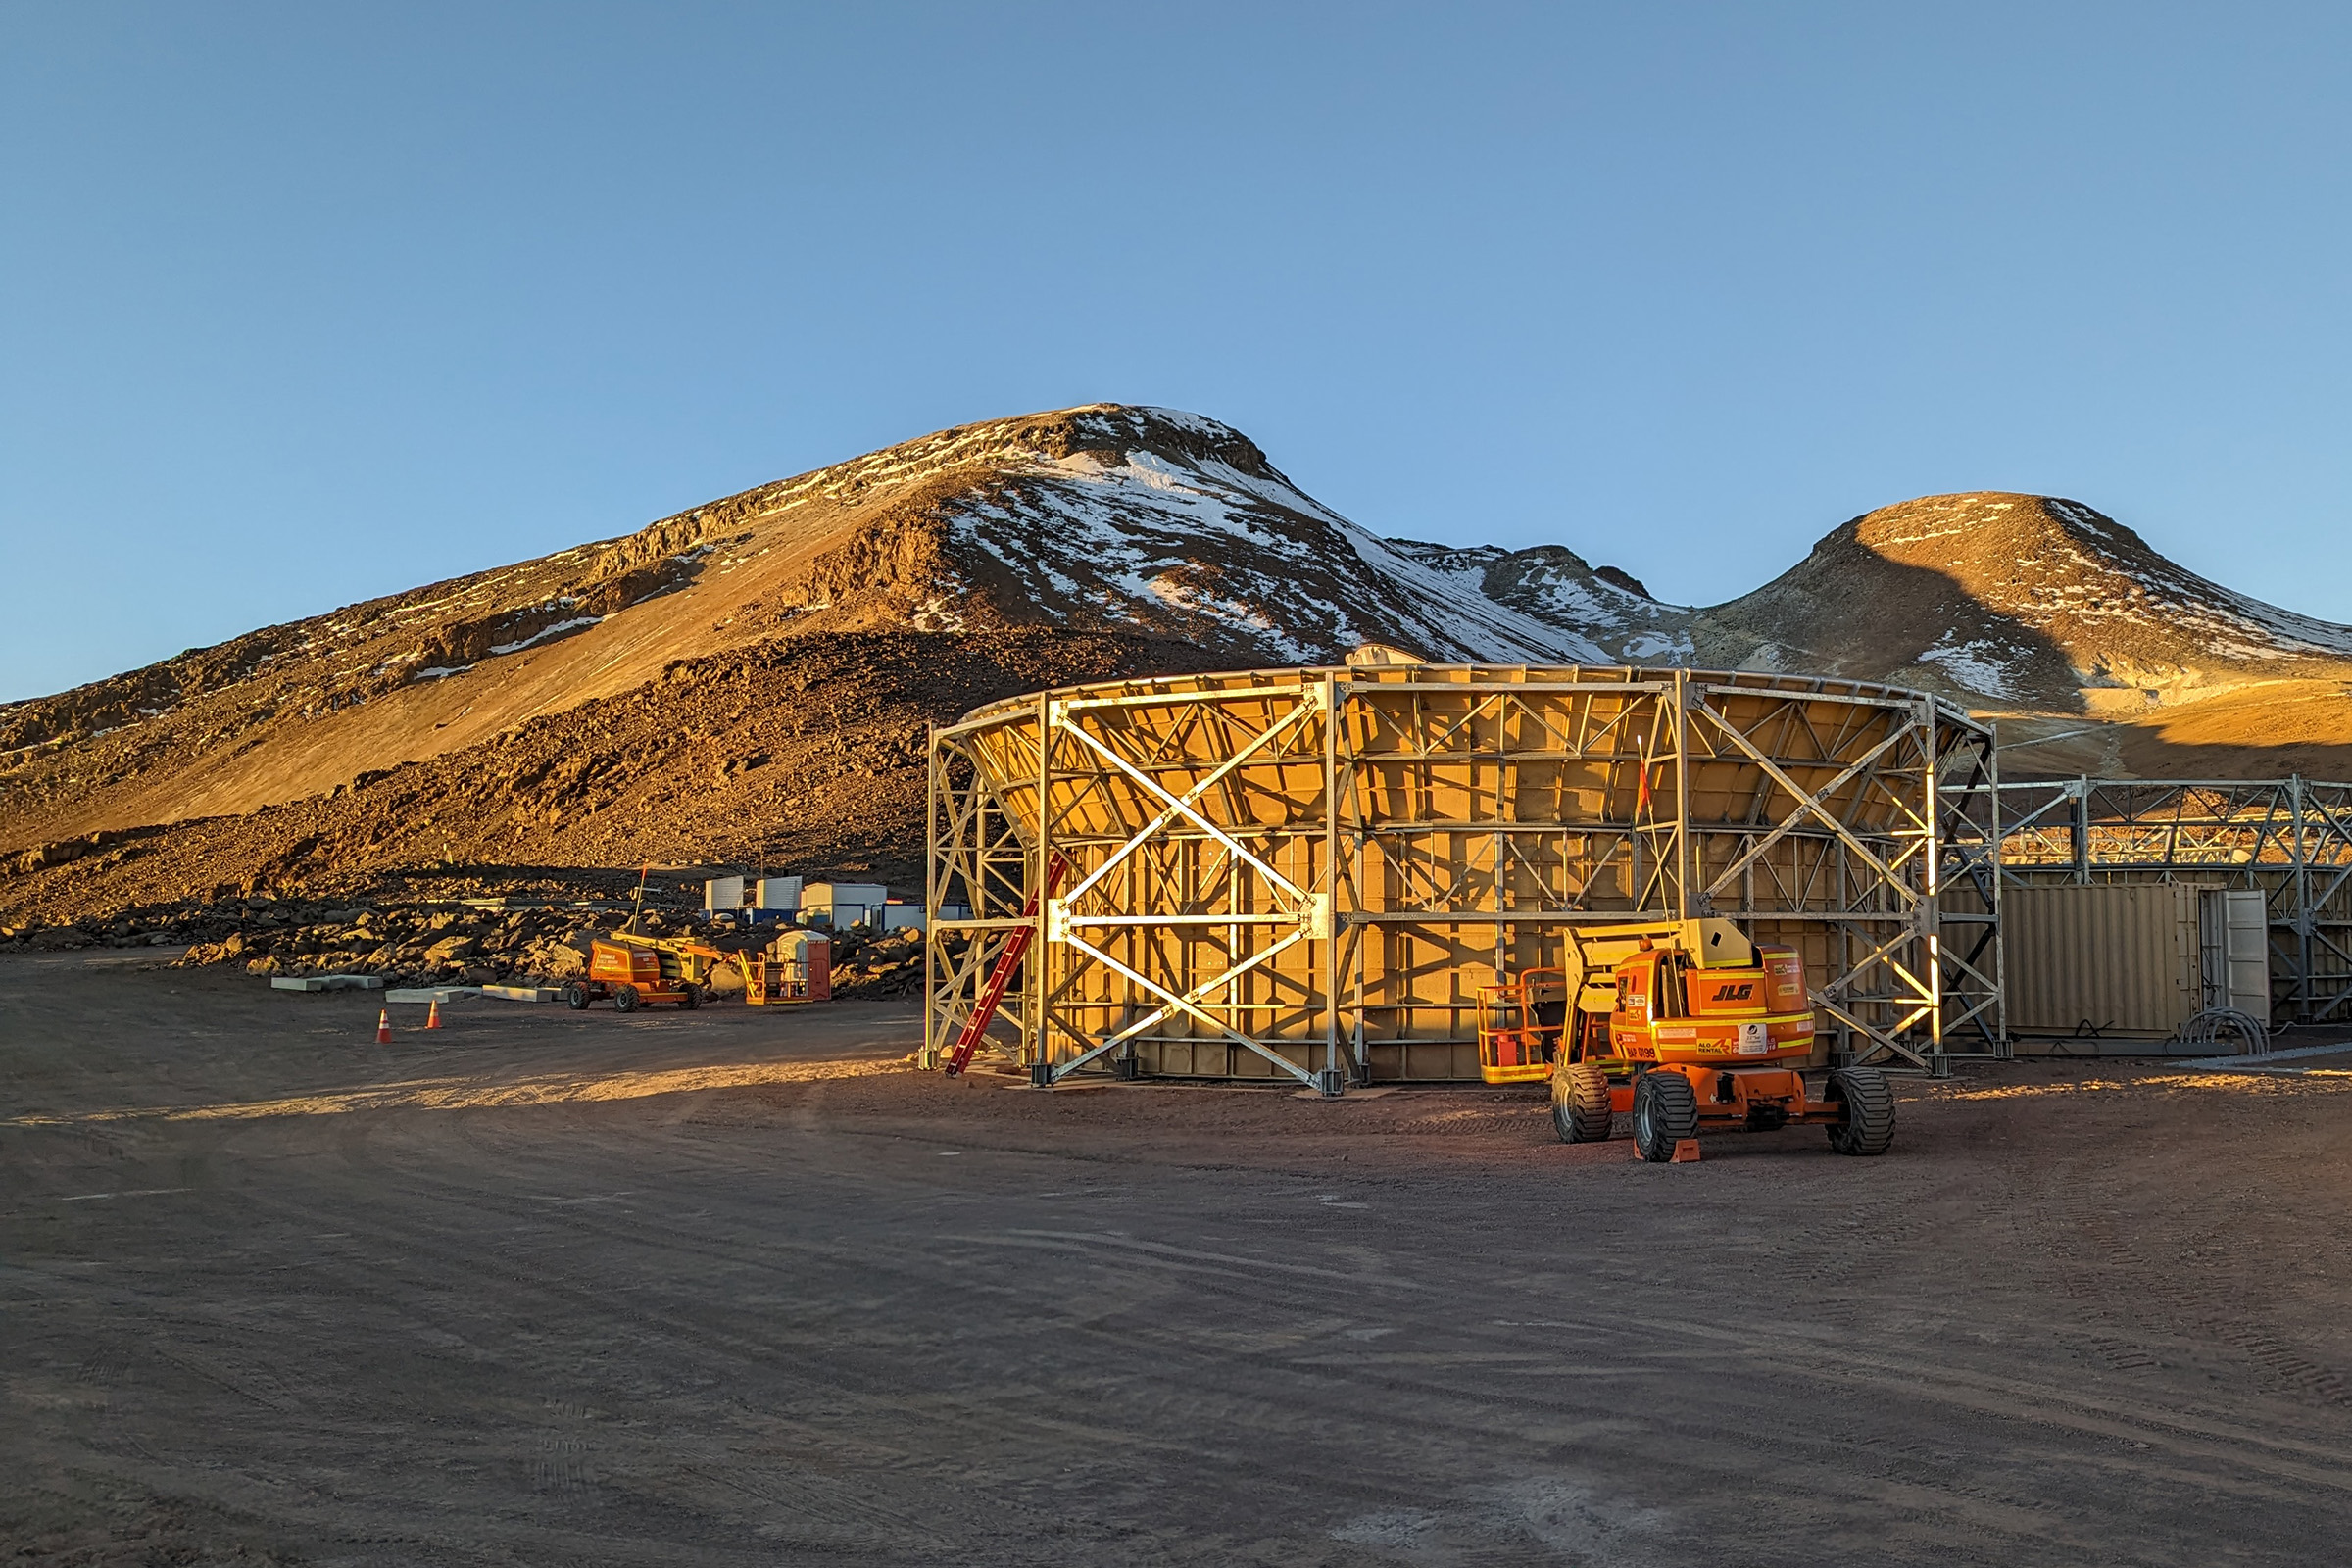 A telescope enclosure sits in front of mountains under a blue sky